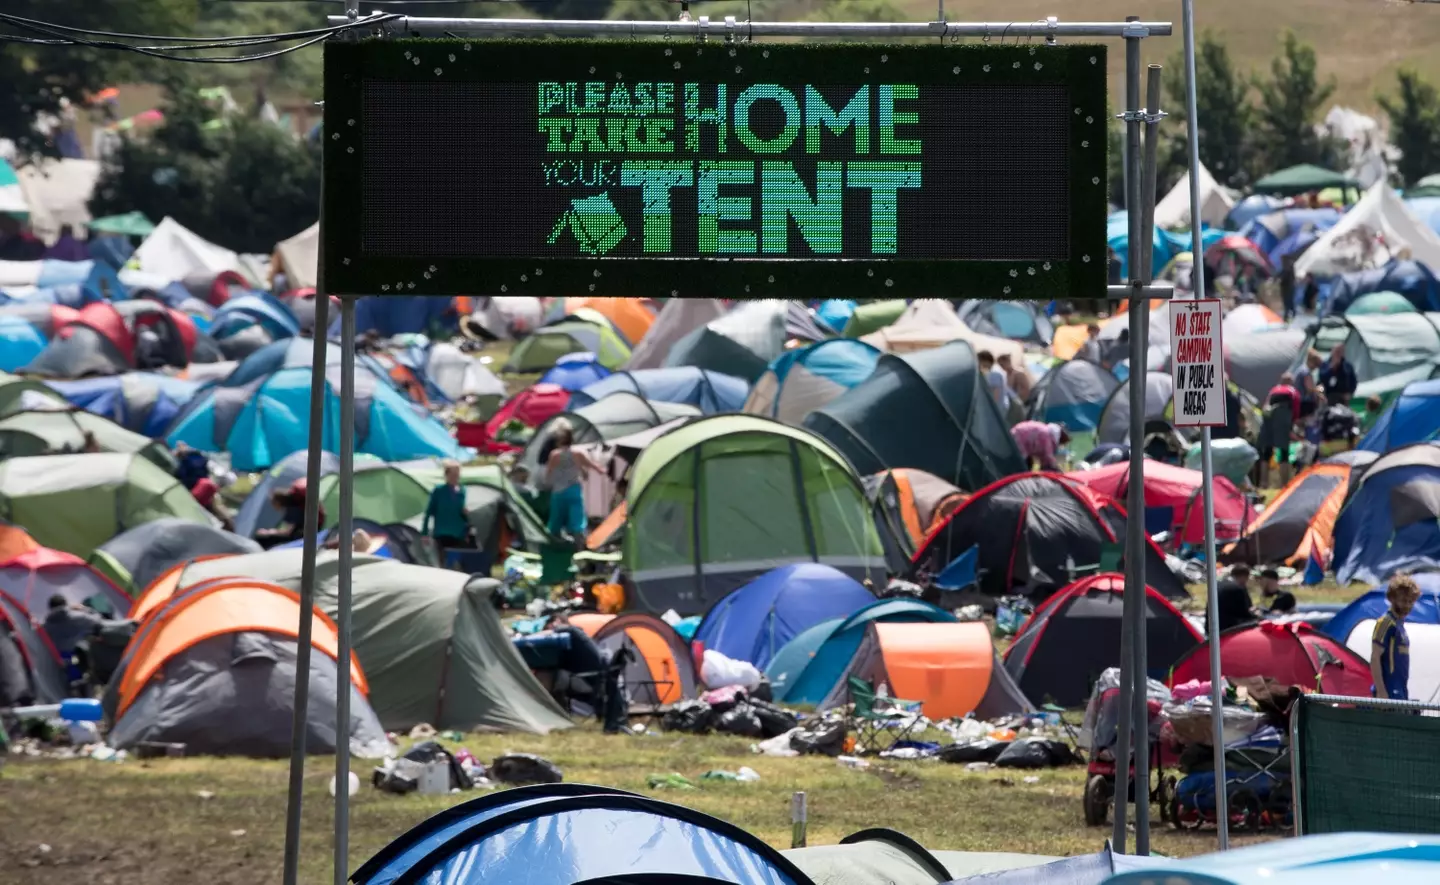 Glastonbury asks festival goers to take their tents and camping equipment with them when they leave Worthy Farm (Matt Cardy/Getty)